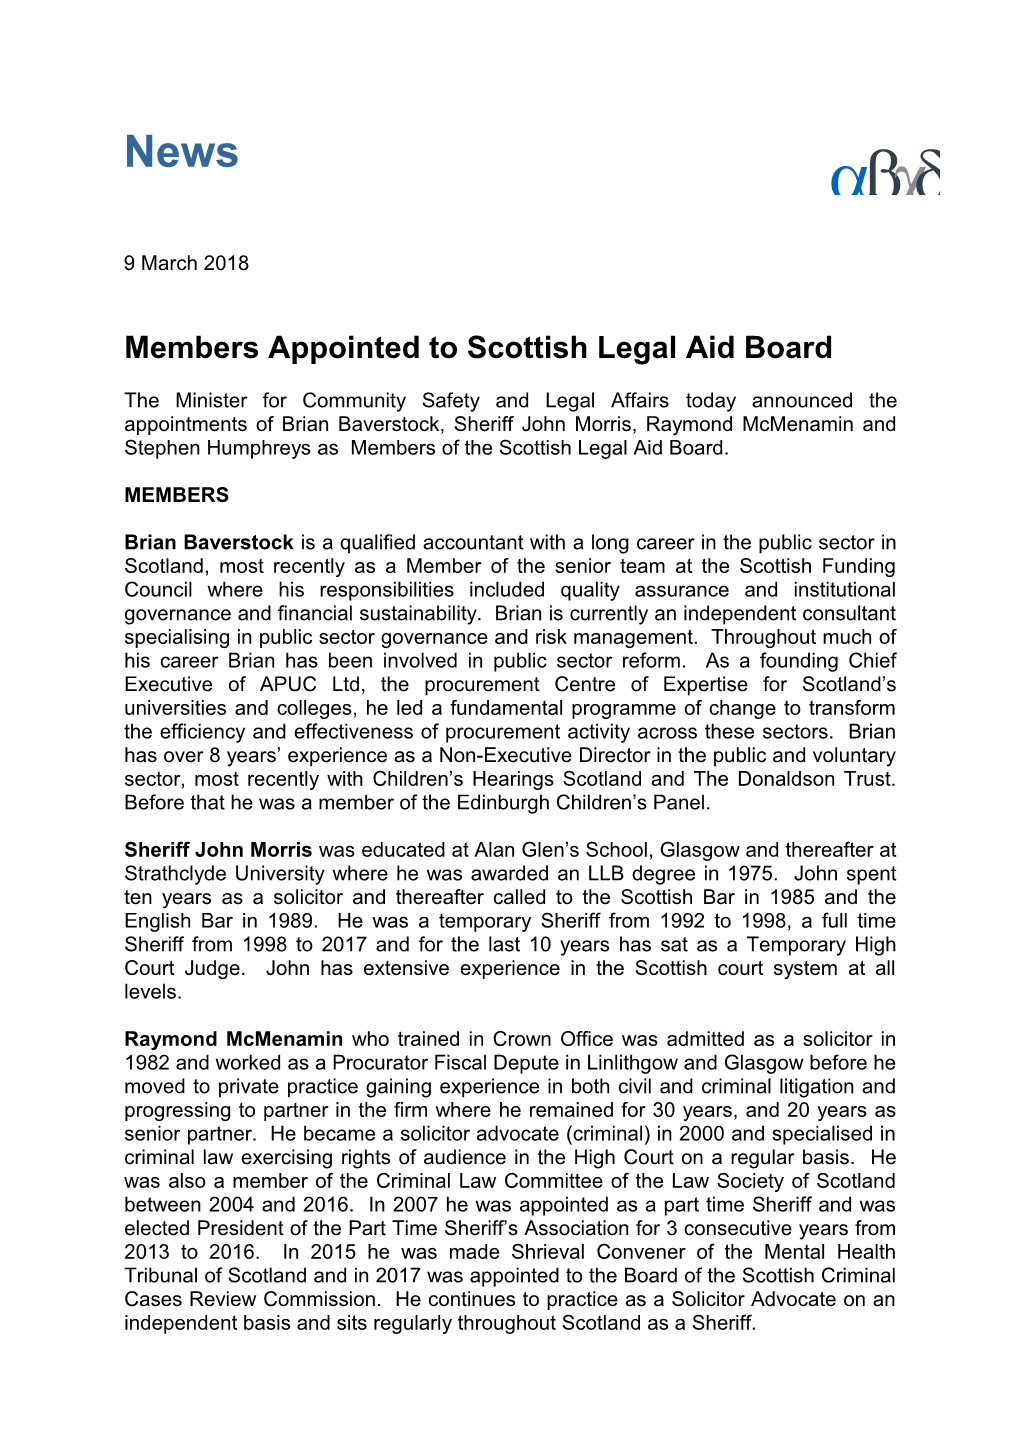 Membersappointed to Scottish Legal Aid Board